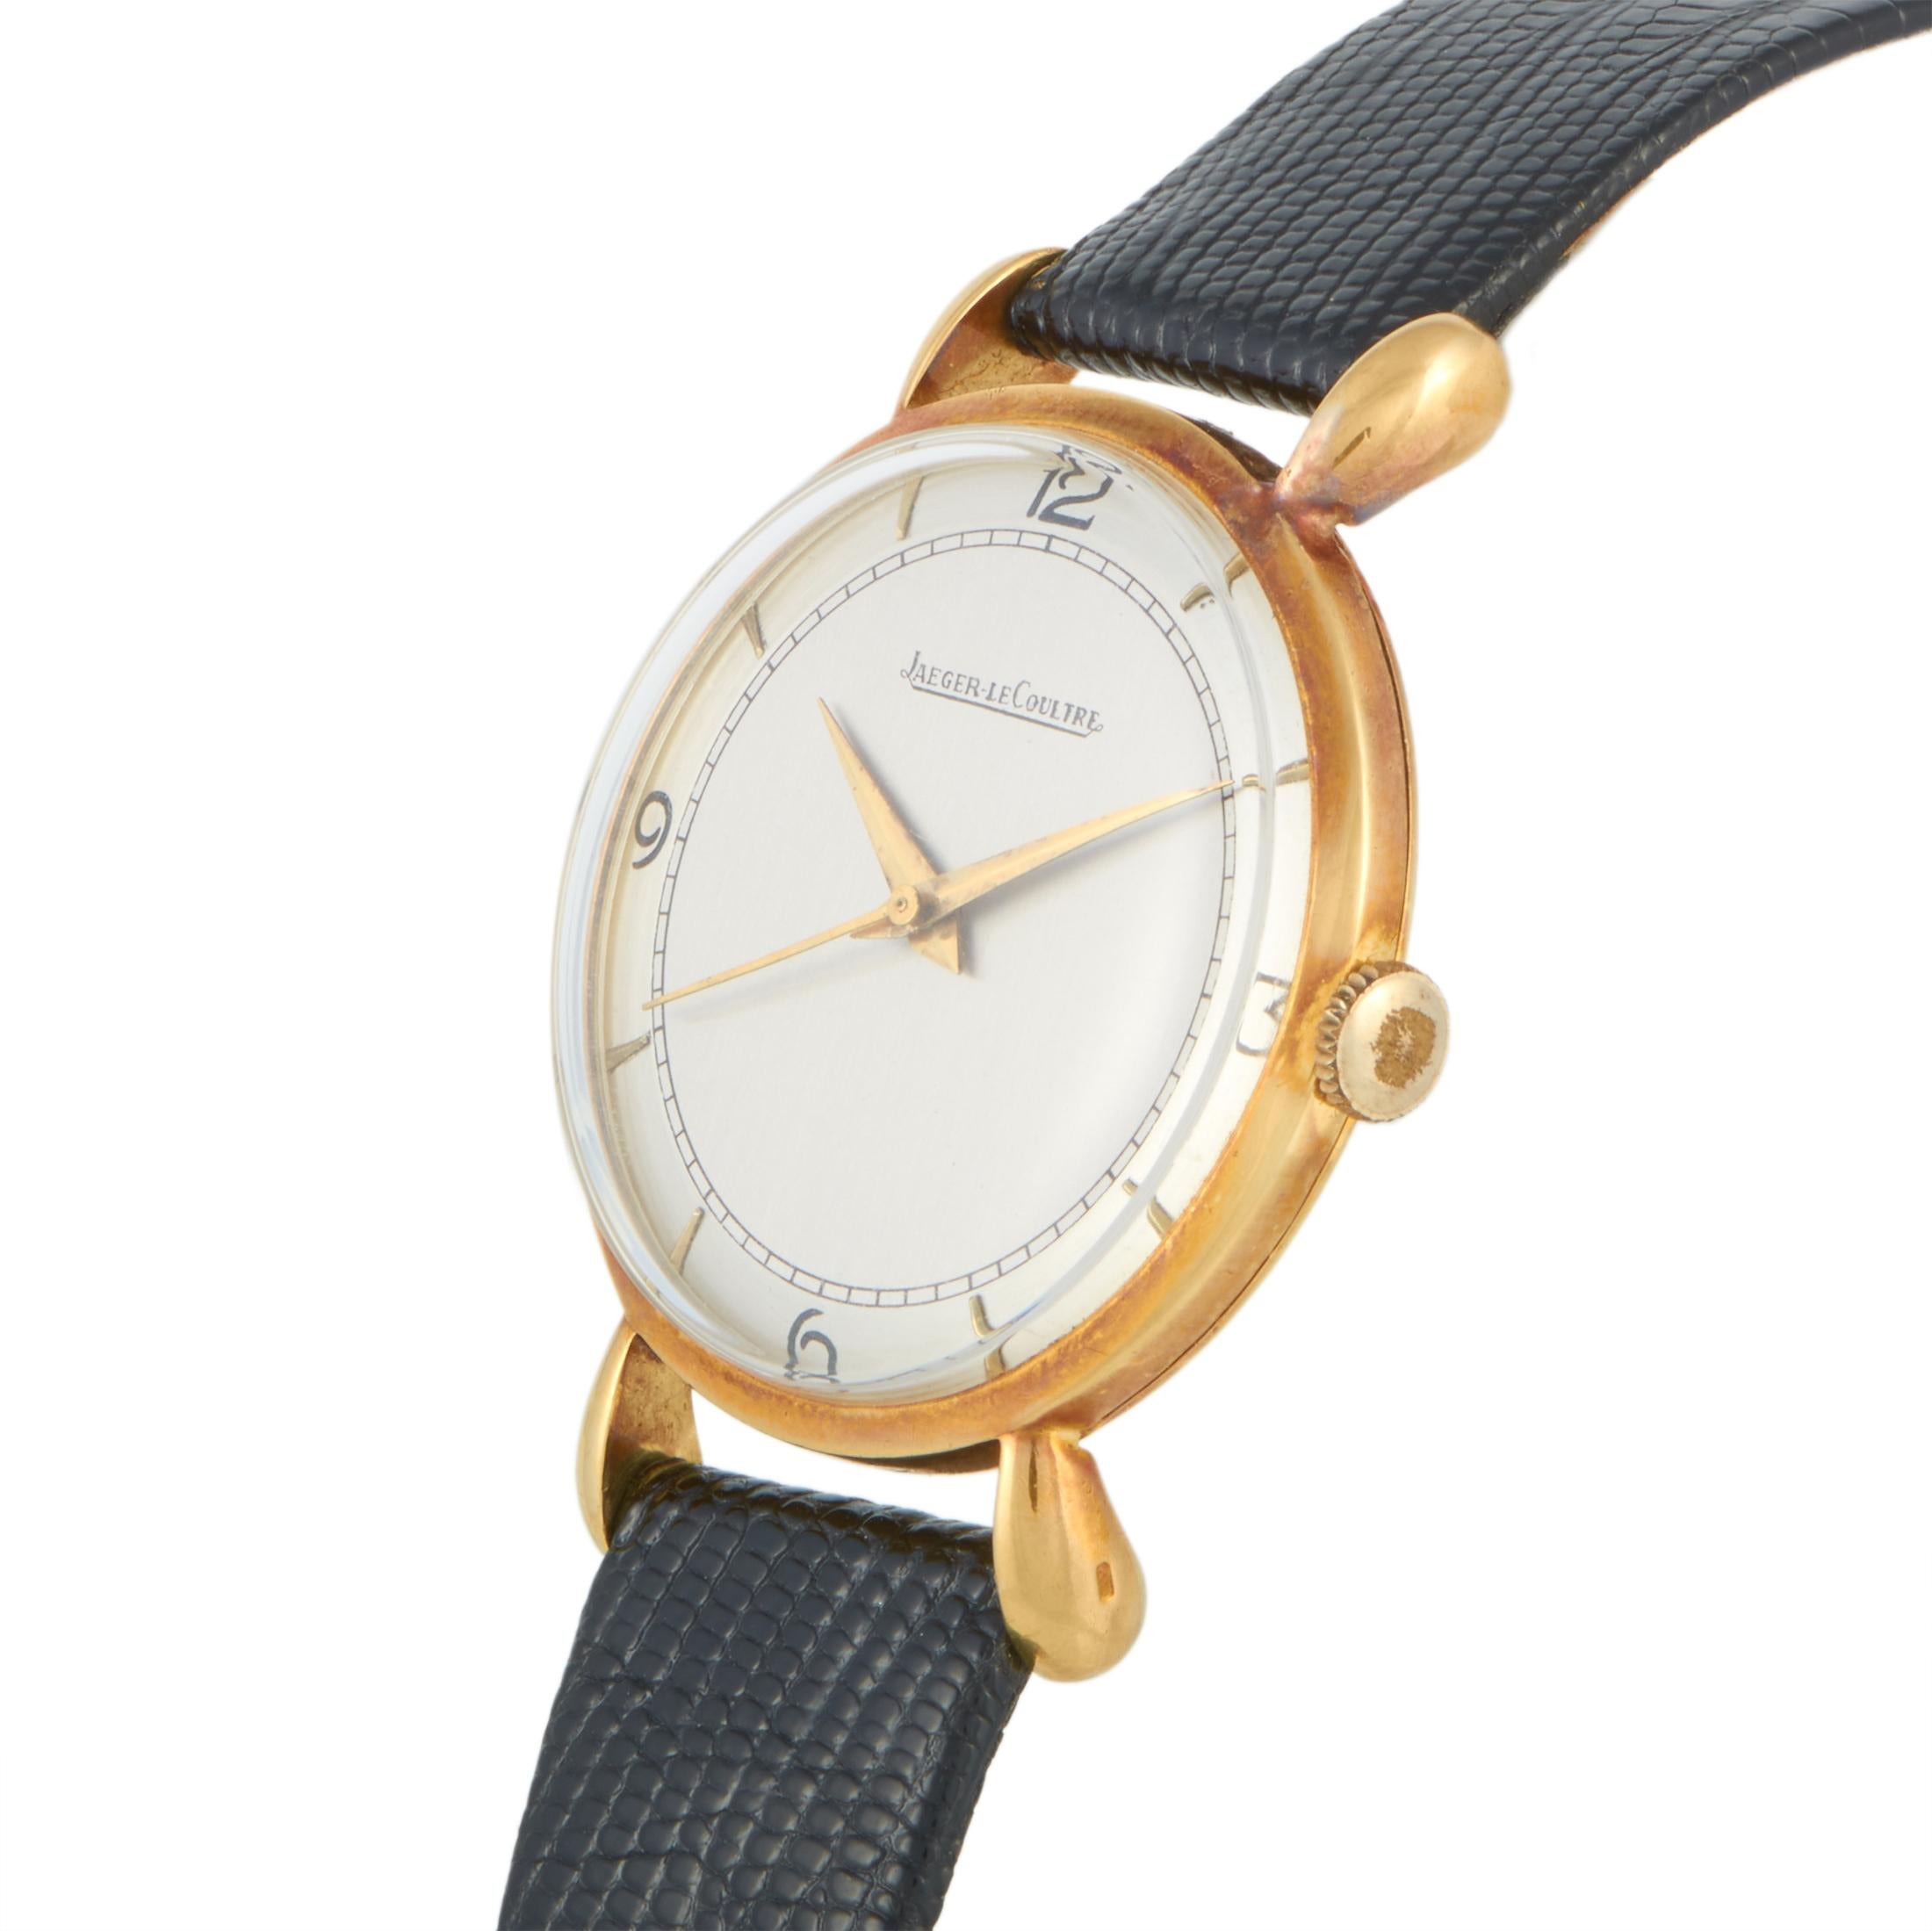 This vintage Jaeger-LeCoultre timepiece is presented with an 18K yellow gold case that measures 35 mm in diameter. The watch is equipped with a hand-wound movement and indicates hours, minutes and seconds on the silver dial. This model is worn on a